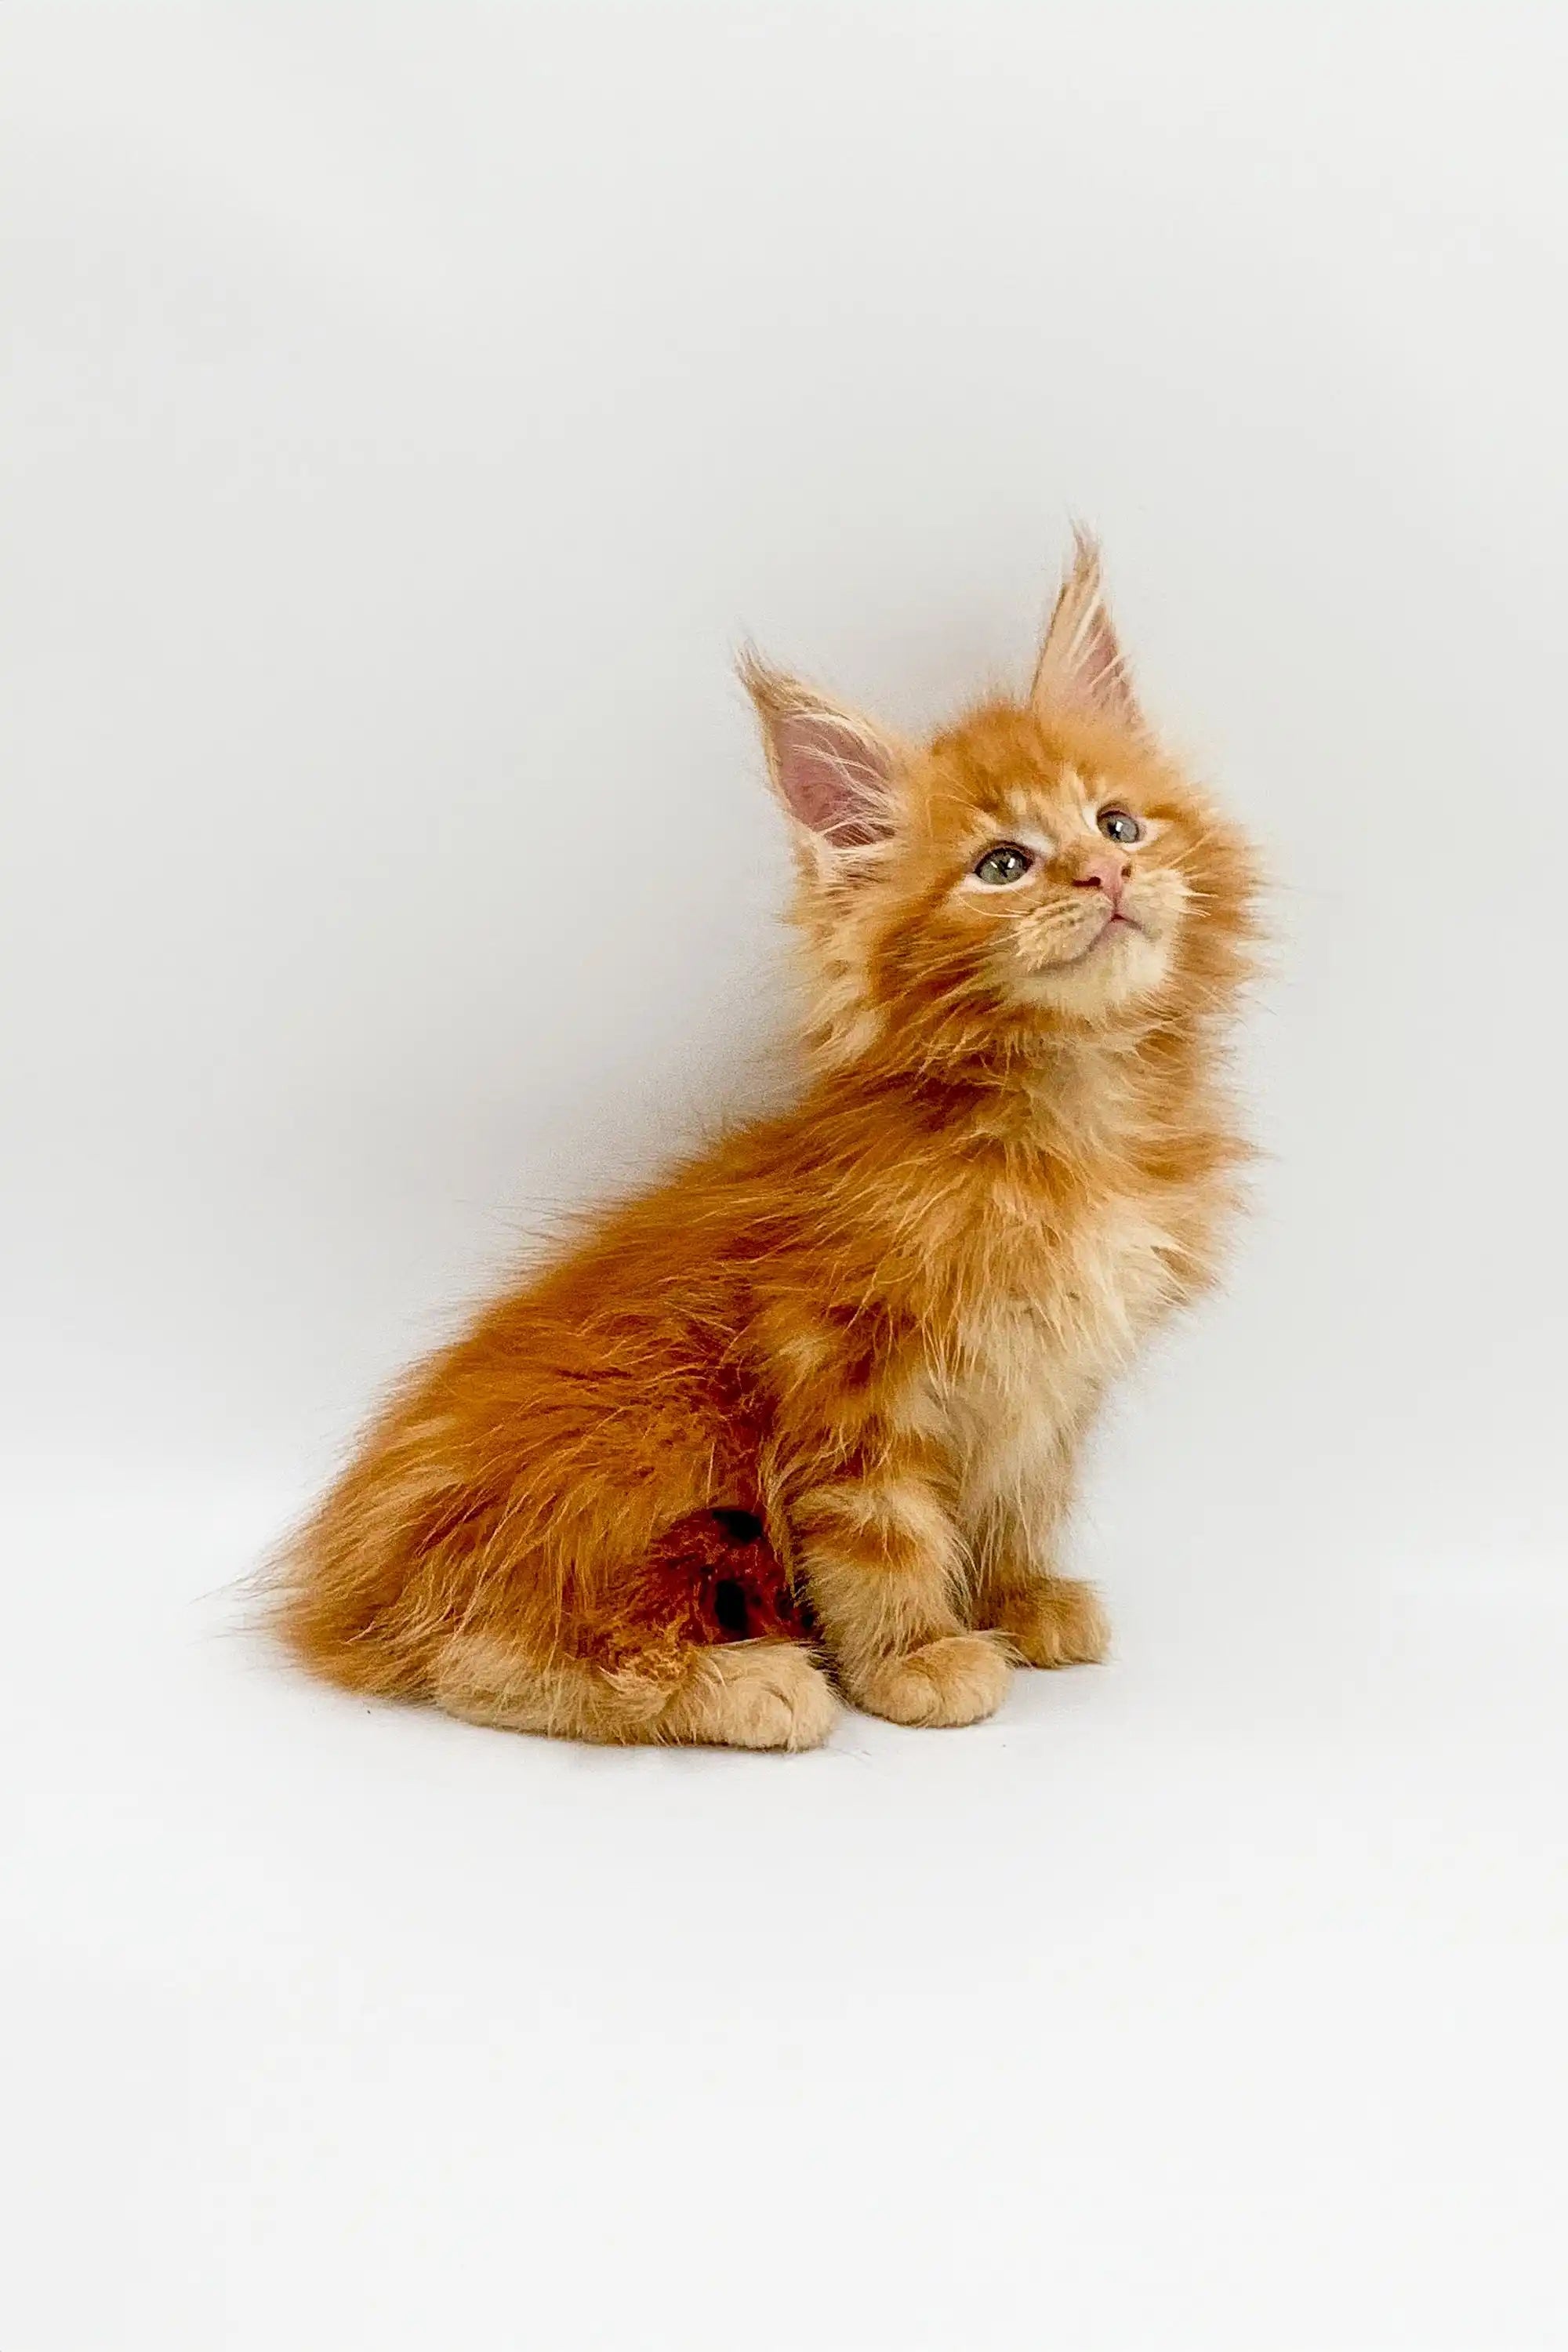 Maine Coon Kittens for Sale Owes | Kitten